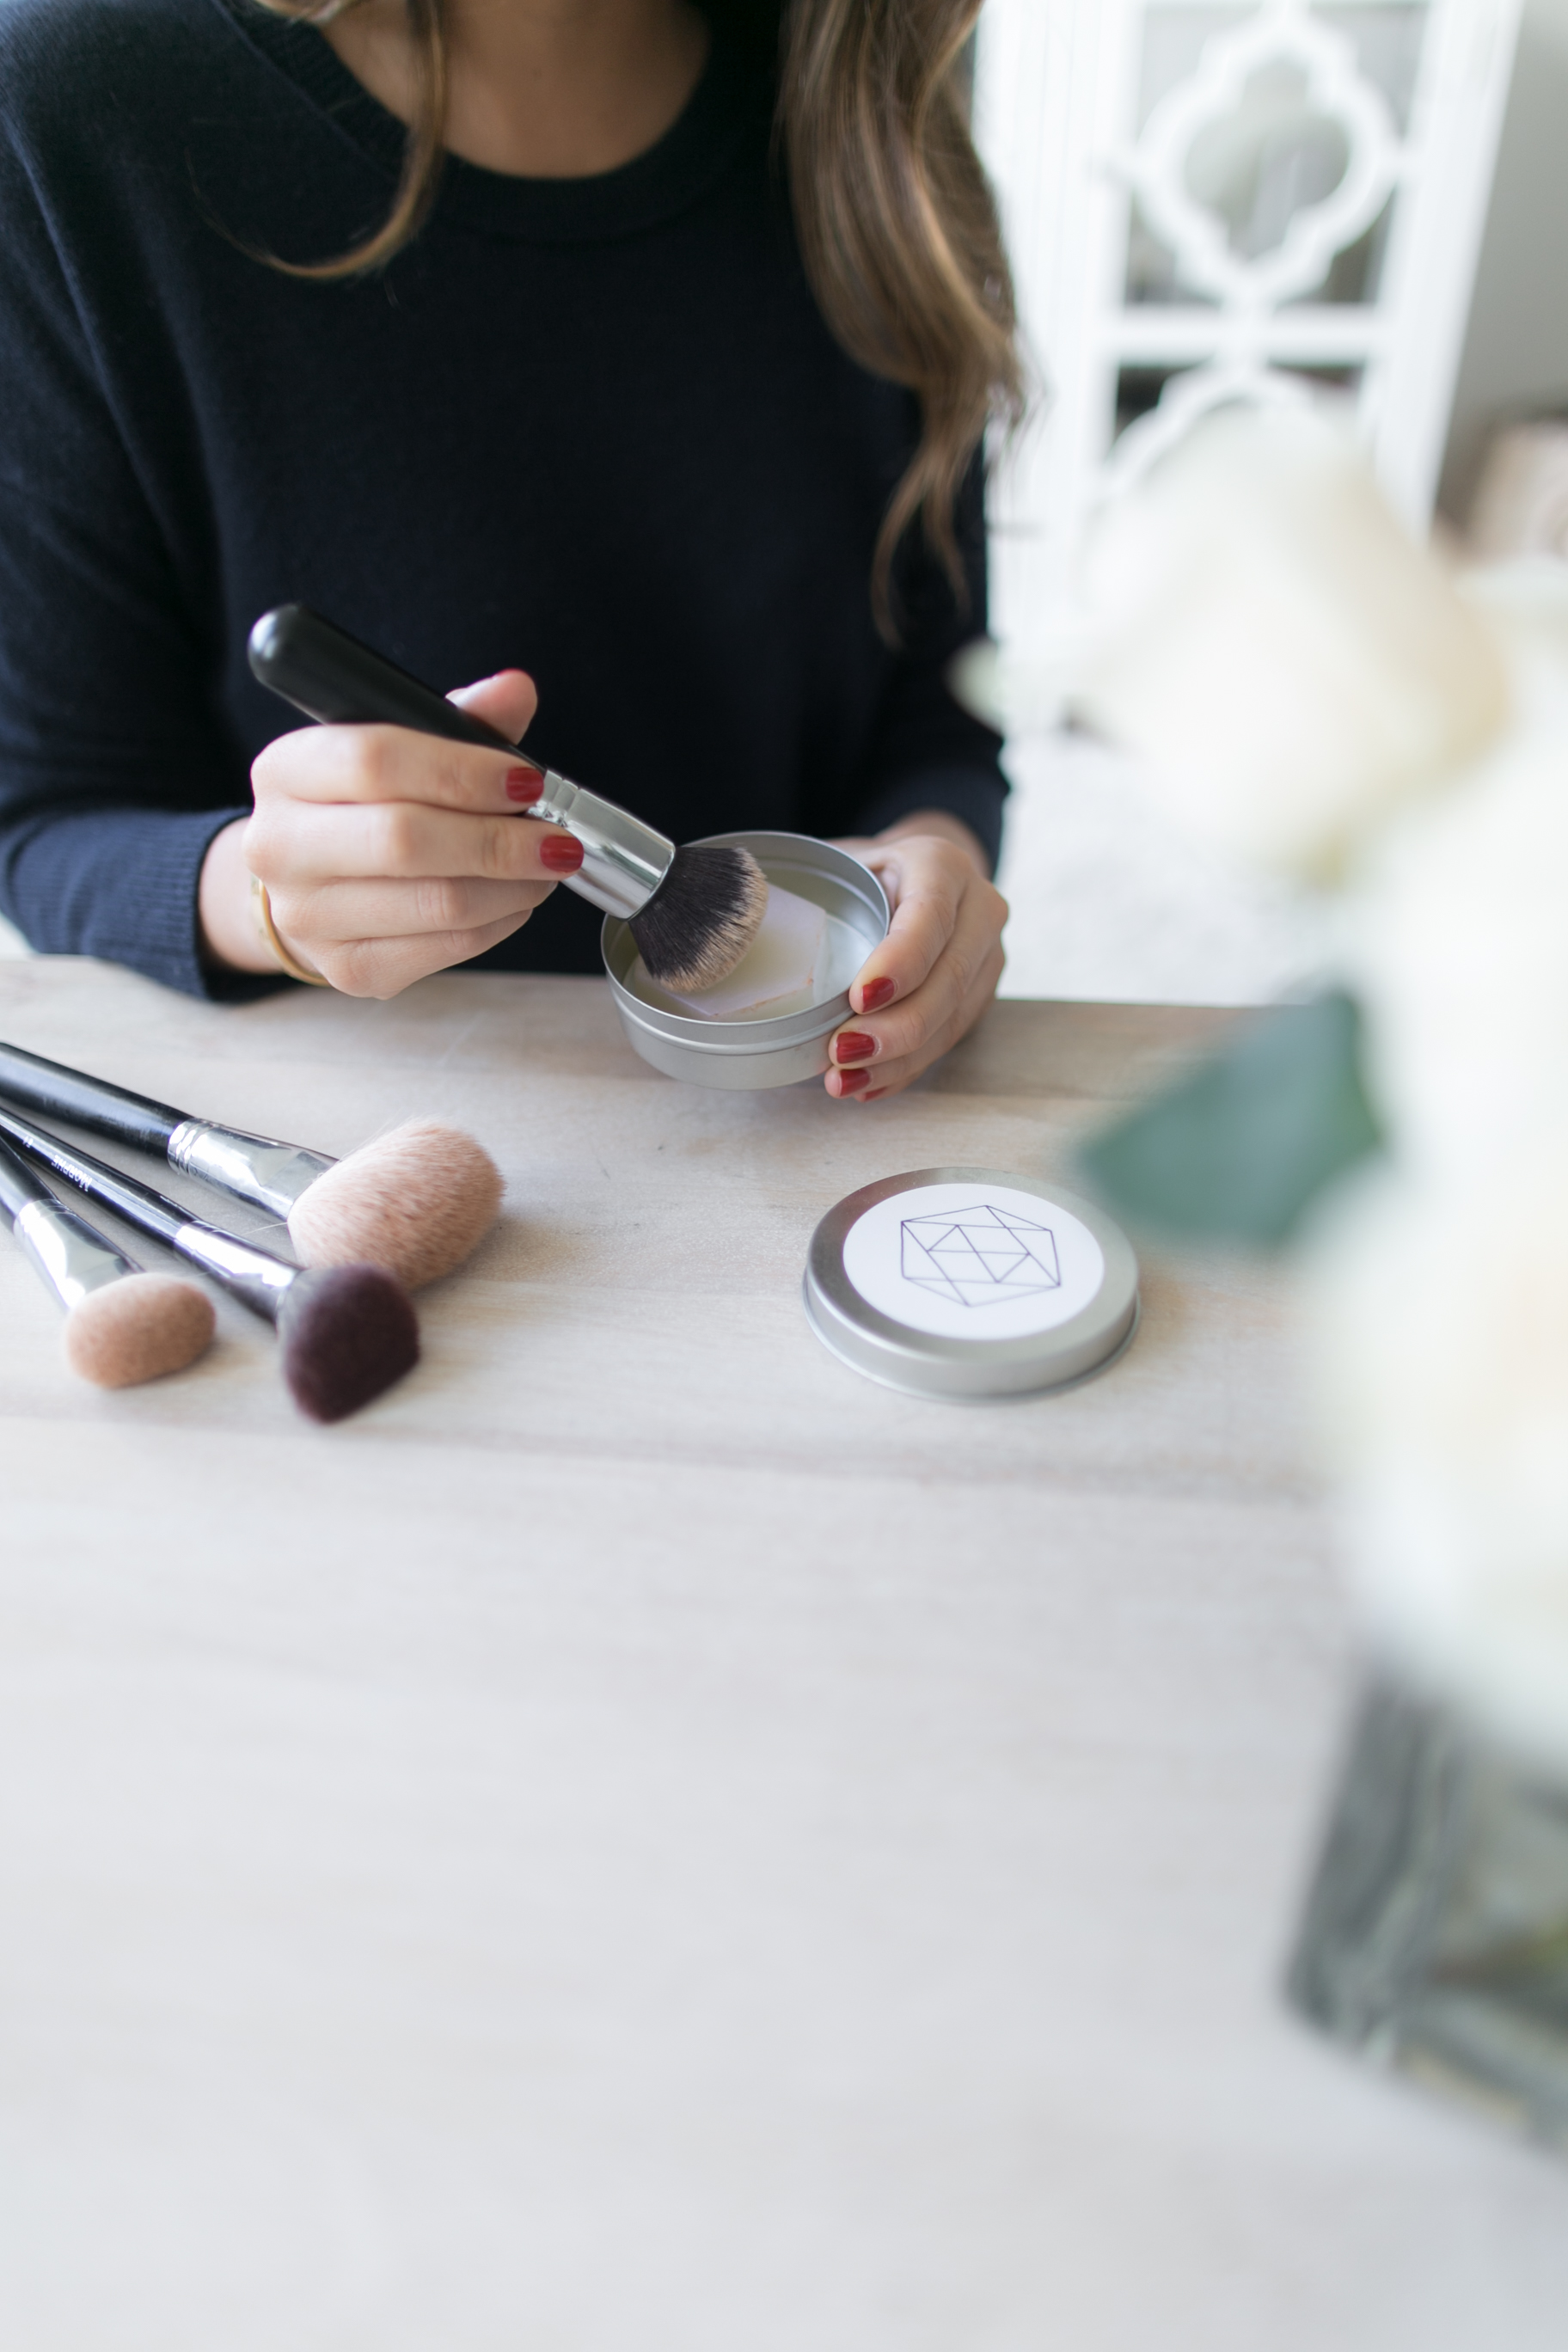 When Did You Last Clean Your Makeup Brushes? You Can Tell Us.